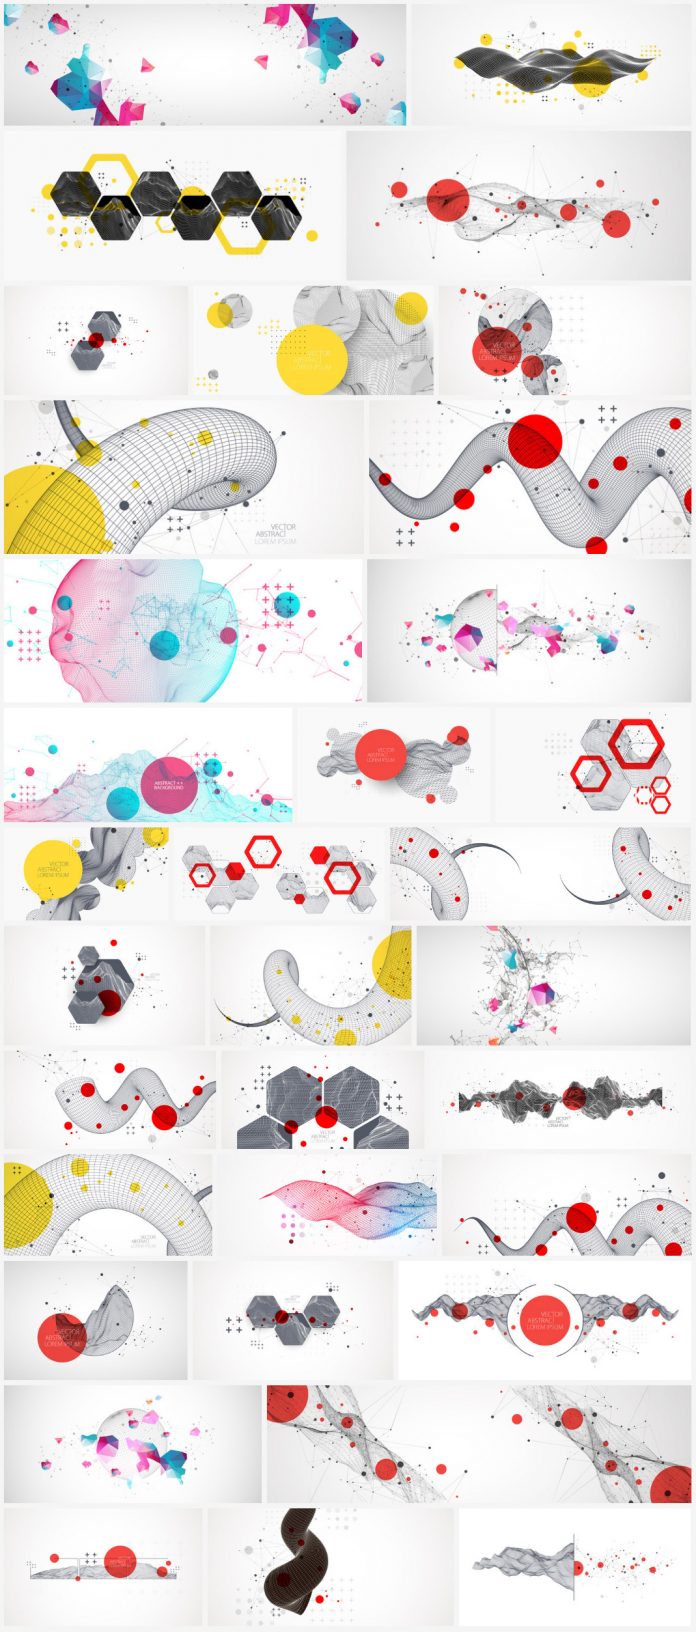 Abstract vector graphics for backgrounds or digital artworks.